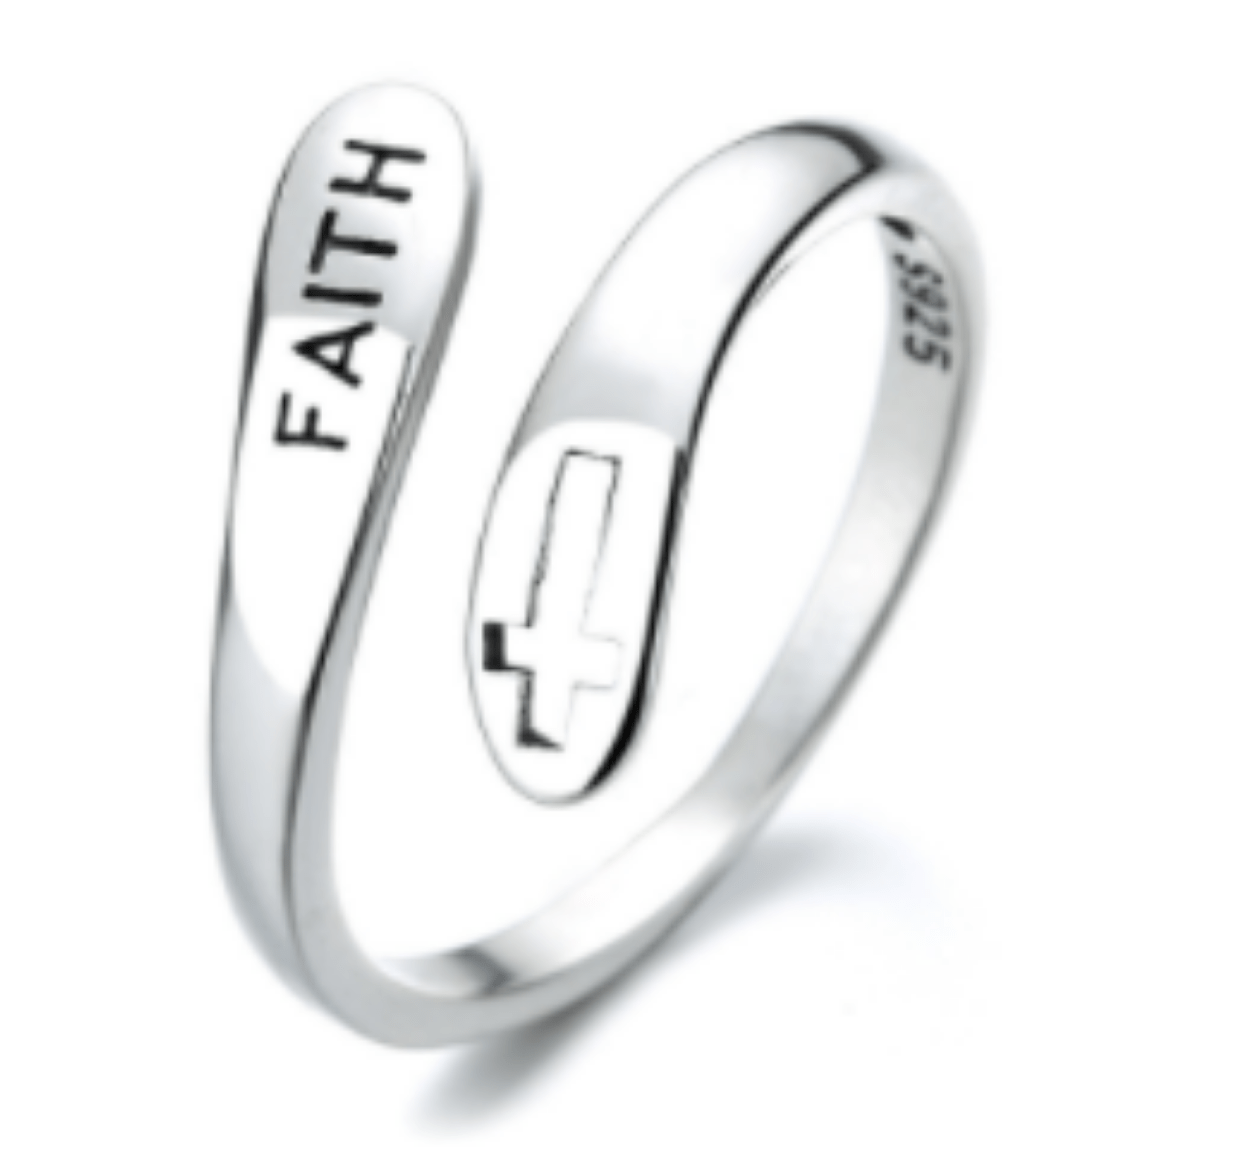 925 Sterling Silver Faith Ring - Sale Ends Tonight